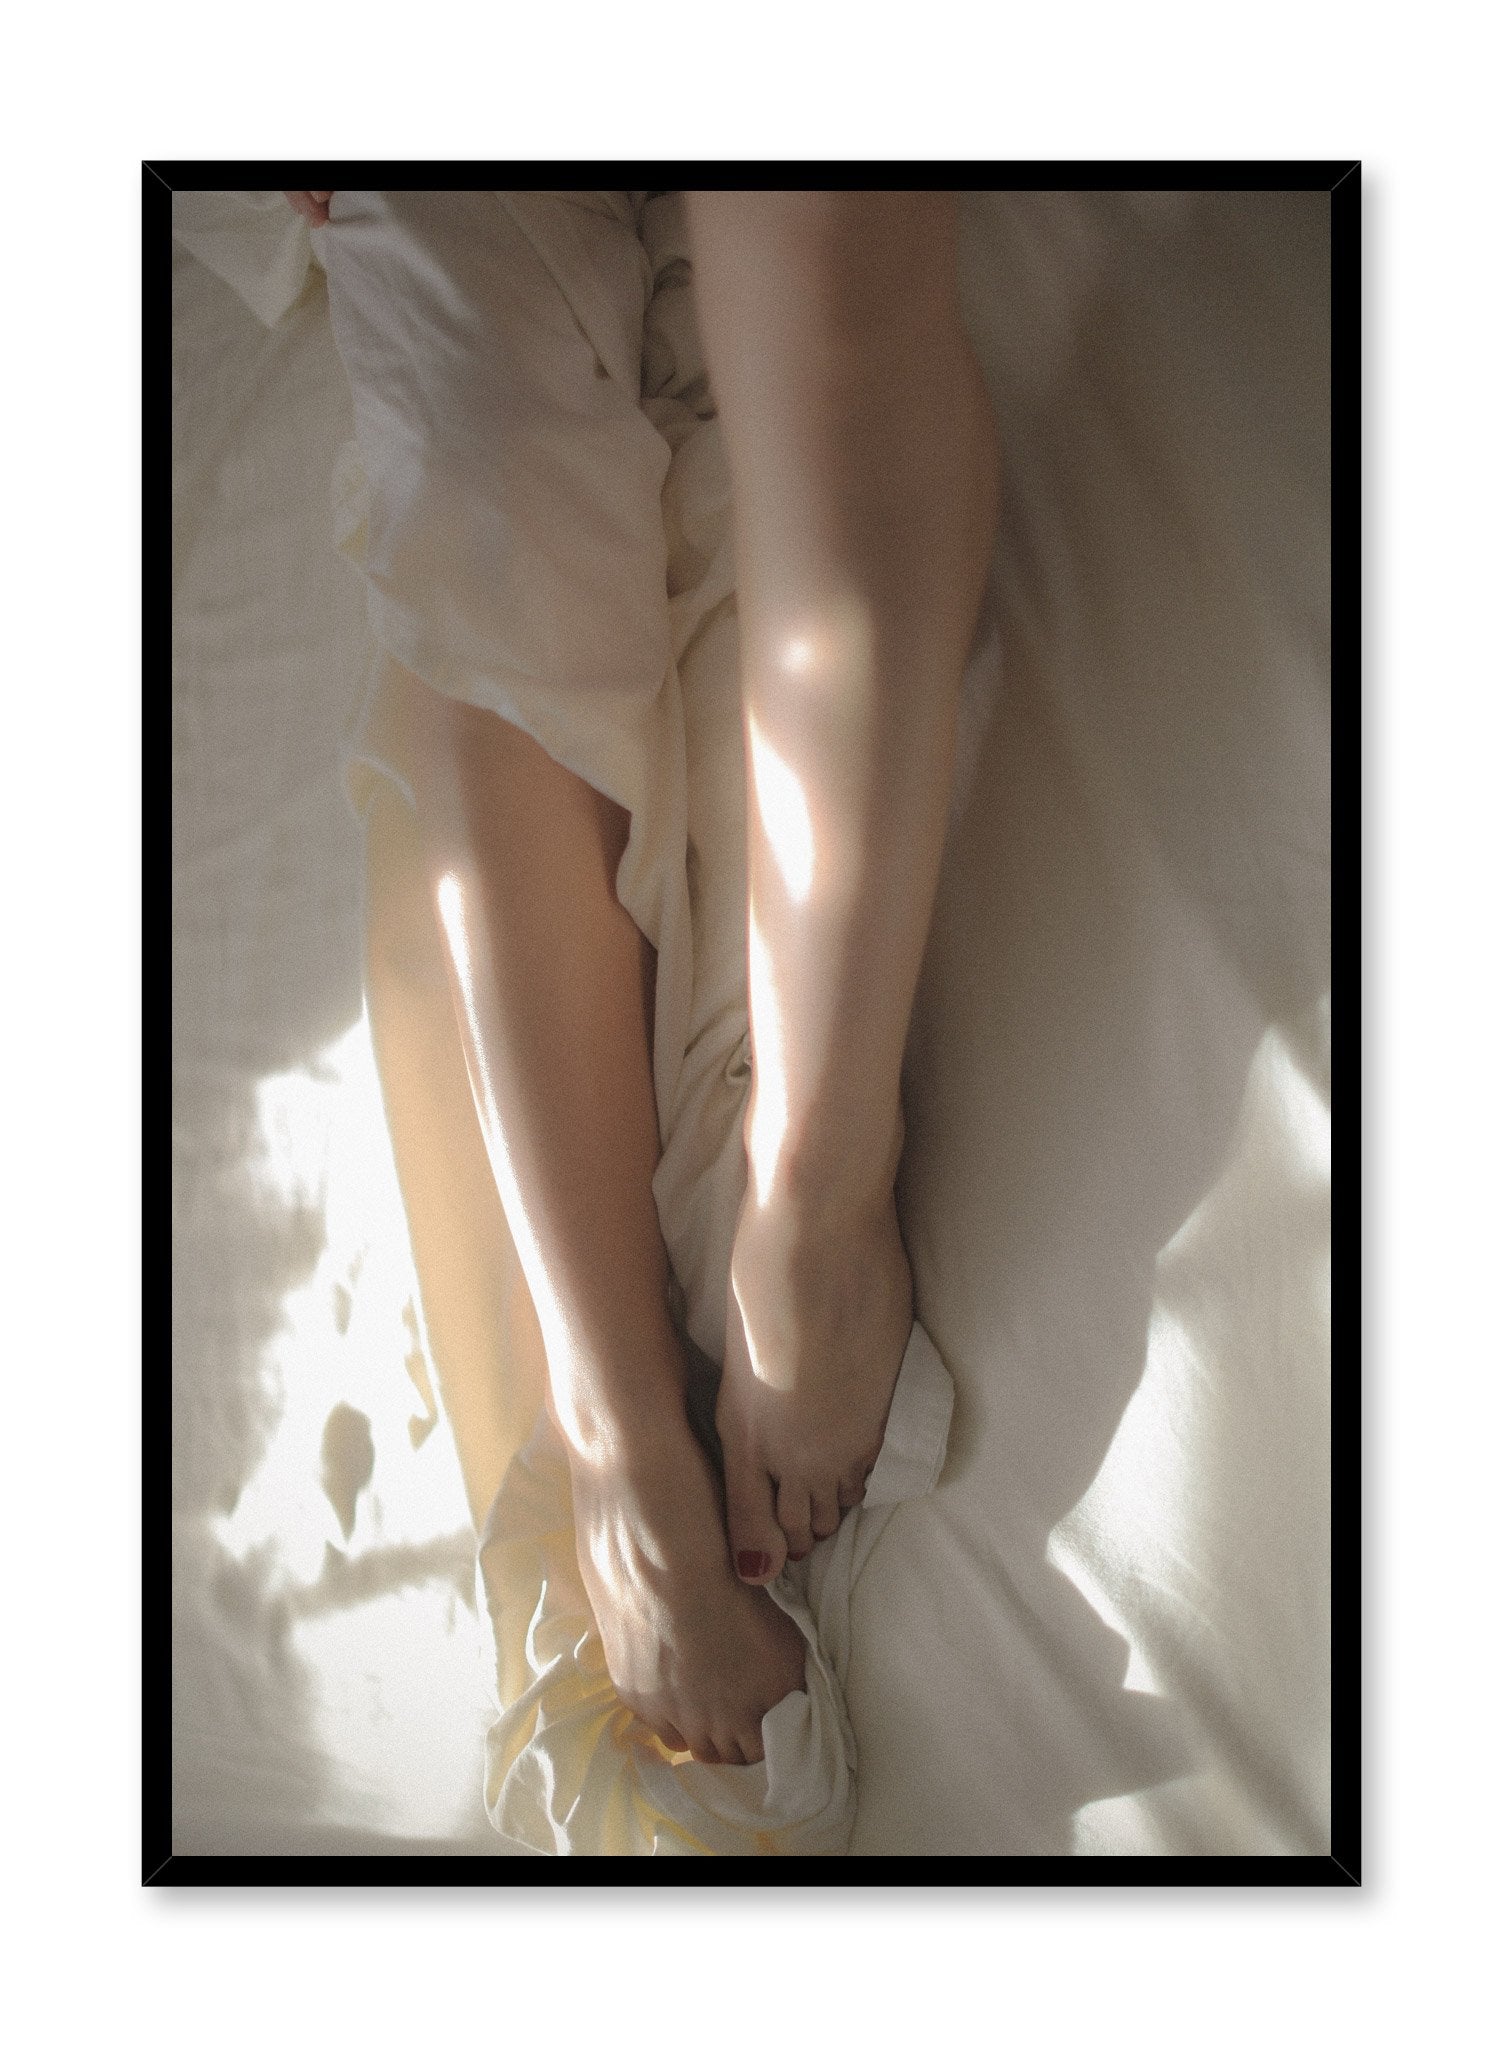 "Between the Sheets" is a minimalist beige and white photography poster by Opposite Wall of a woman’s nude legs, and feet in white bed sheets.